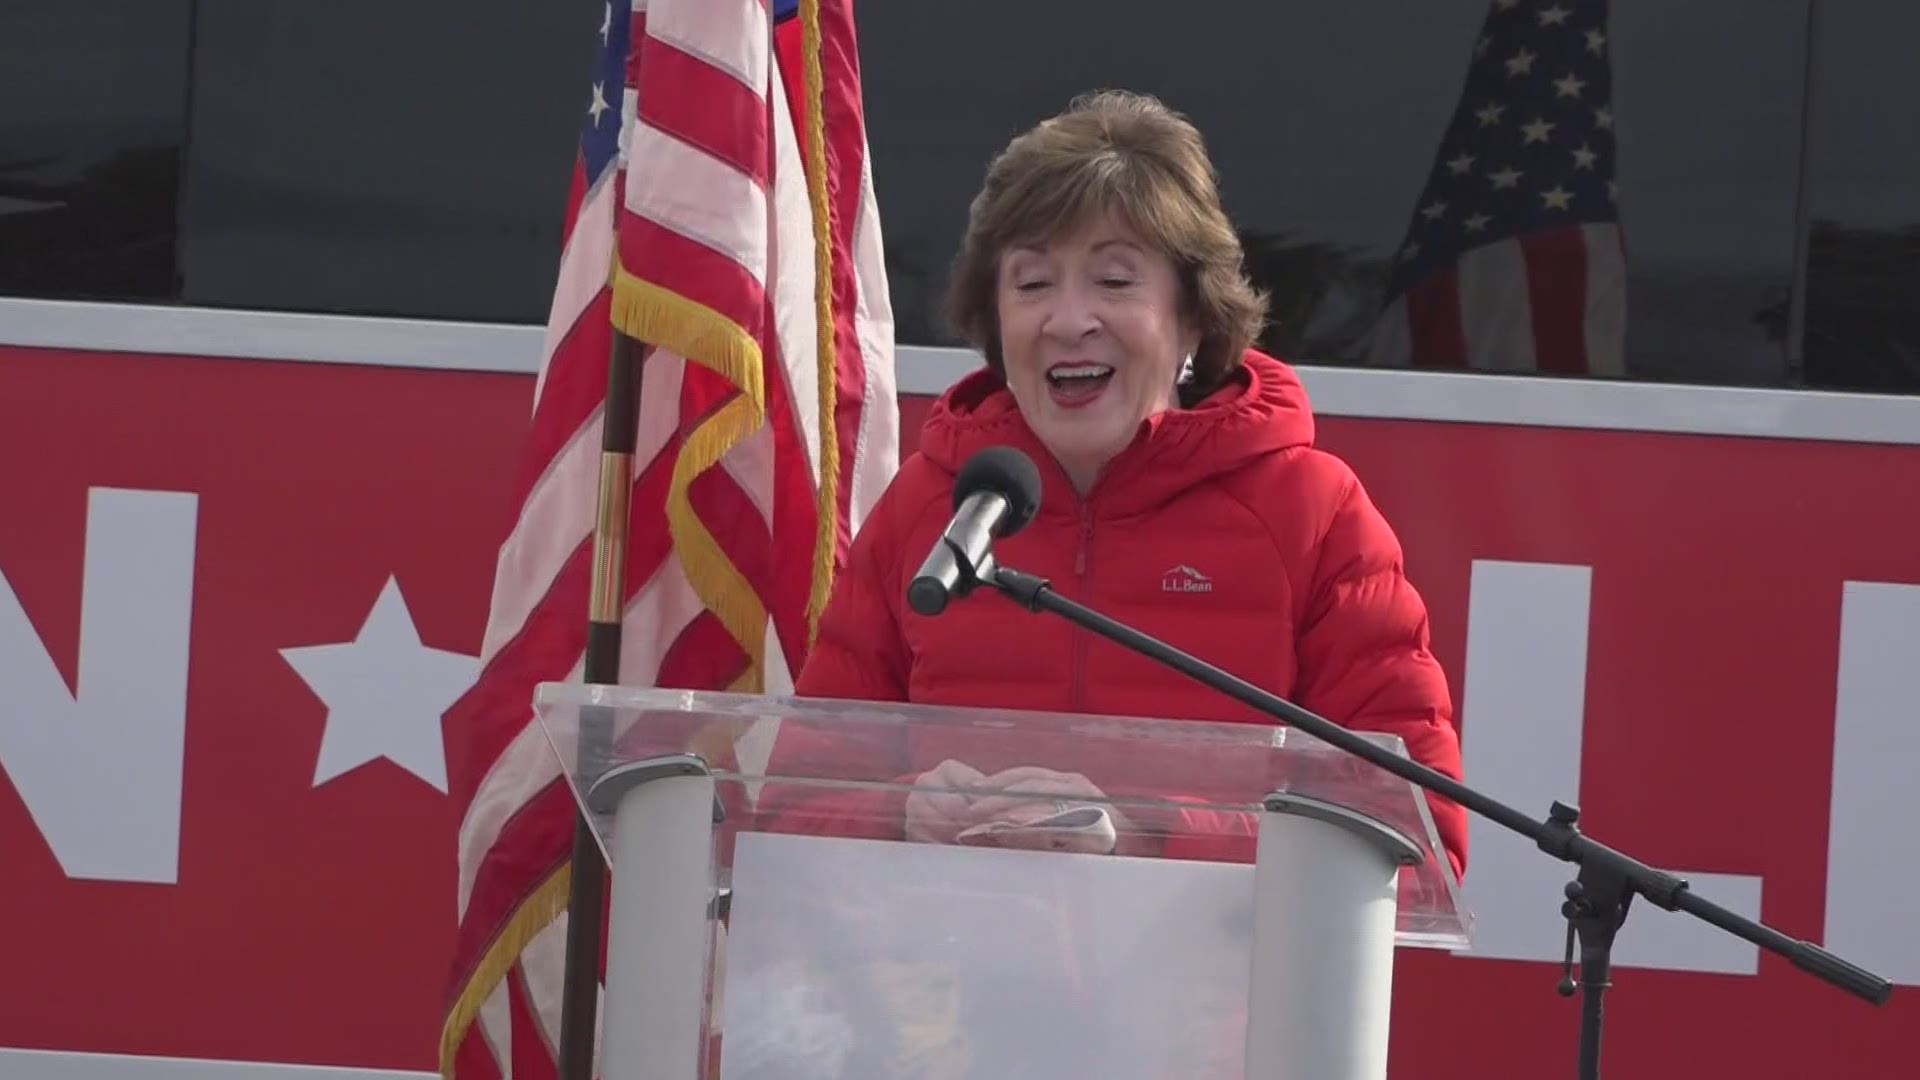 Collins says she will also serve those who didn't vote for her while making history in the process.